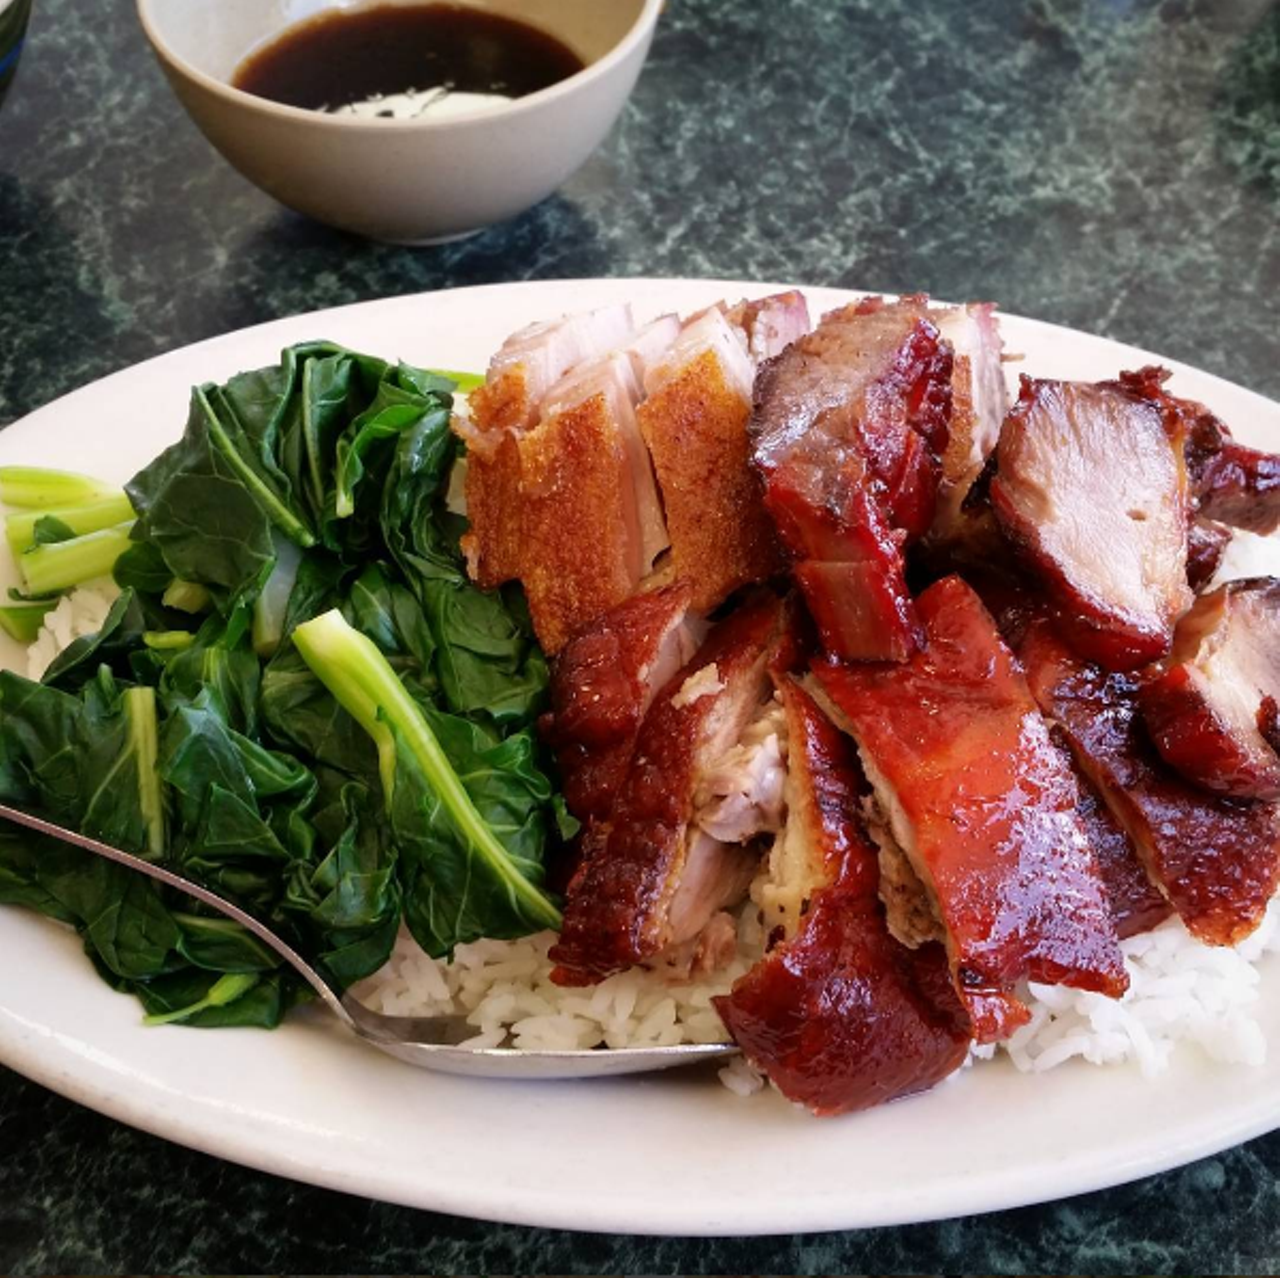 Char siu/roast duck combo appetizer from Tasty Wok
1246 E. Colonial Drive, 407-896-8988
Try both Cantonese BBQ specialties with this combo plate of both sweet-glazed roast pork (char siu) and unctuous roast duck. Just watch out for the bones; spitting them out isn&#146;t rude here.
Photo via justageekboy/Instagram